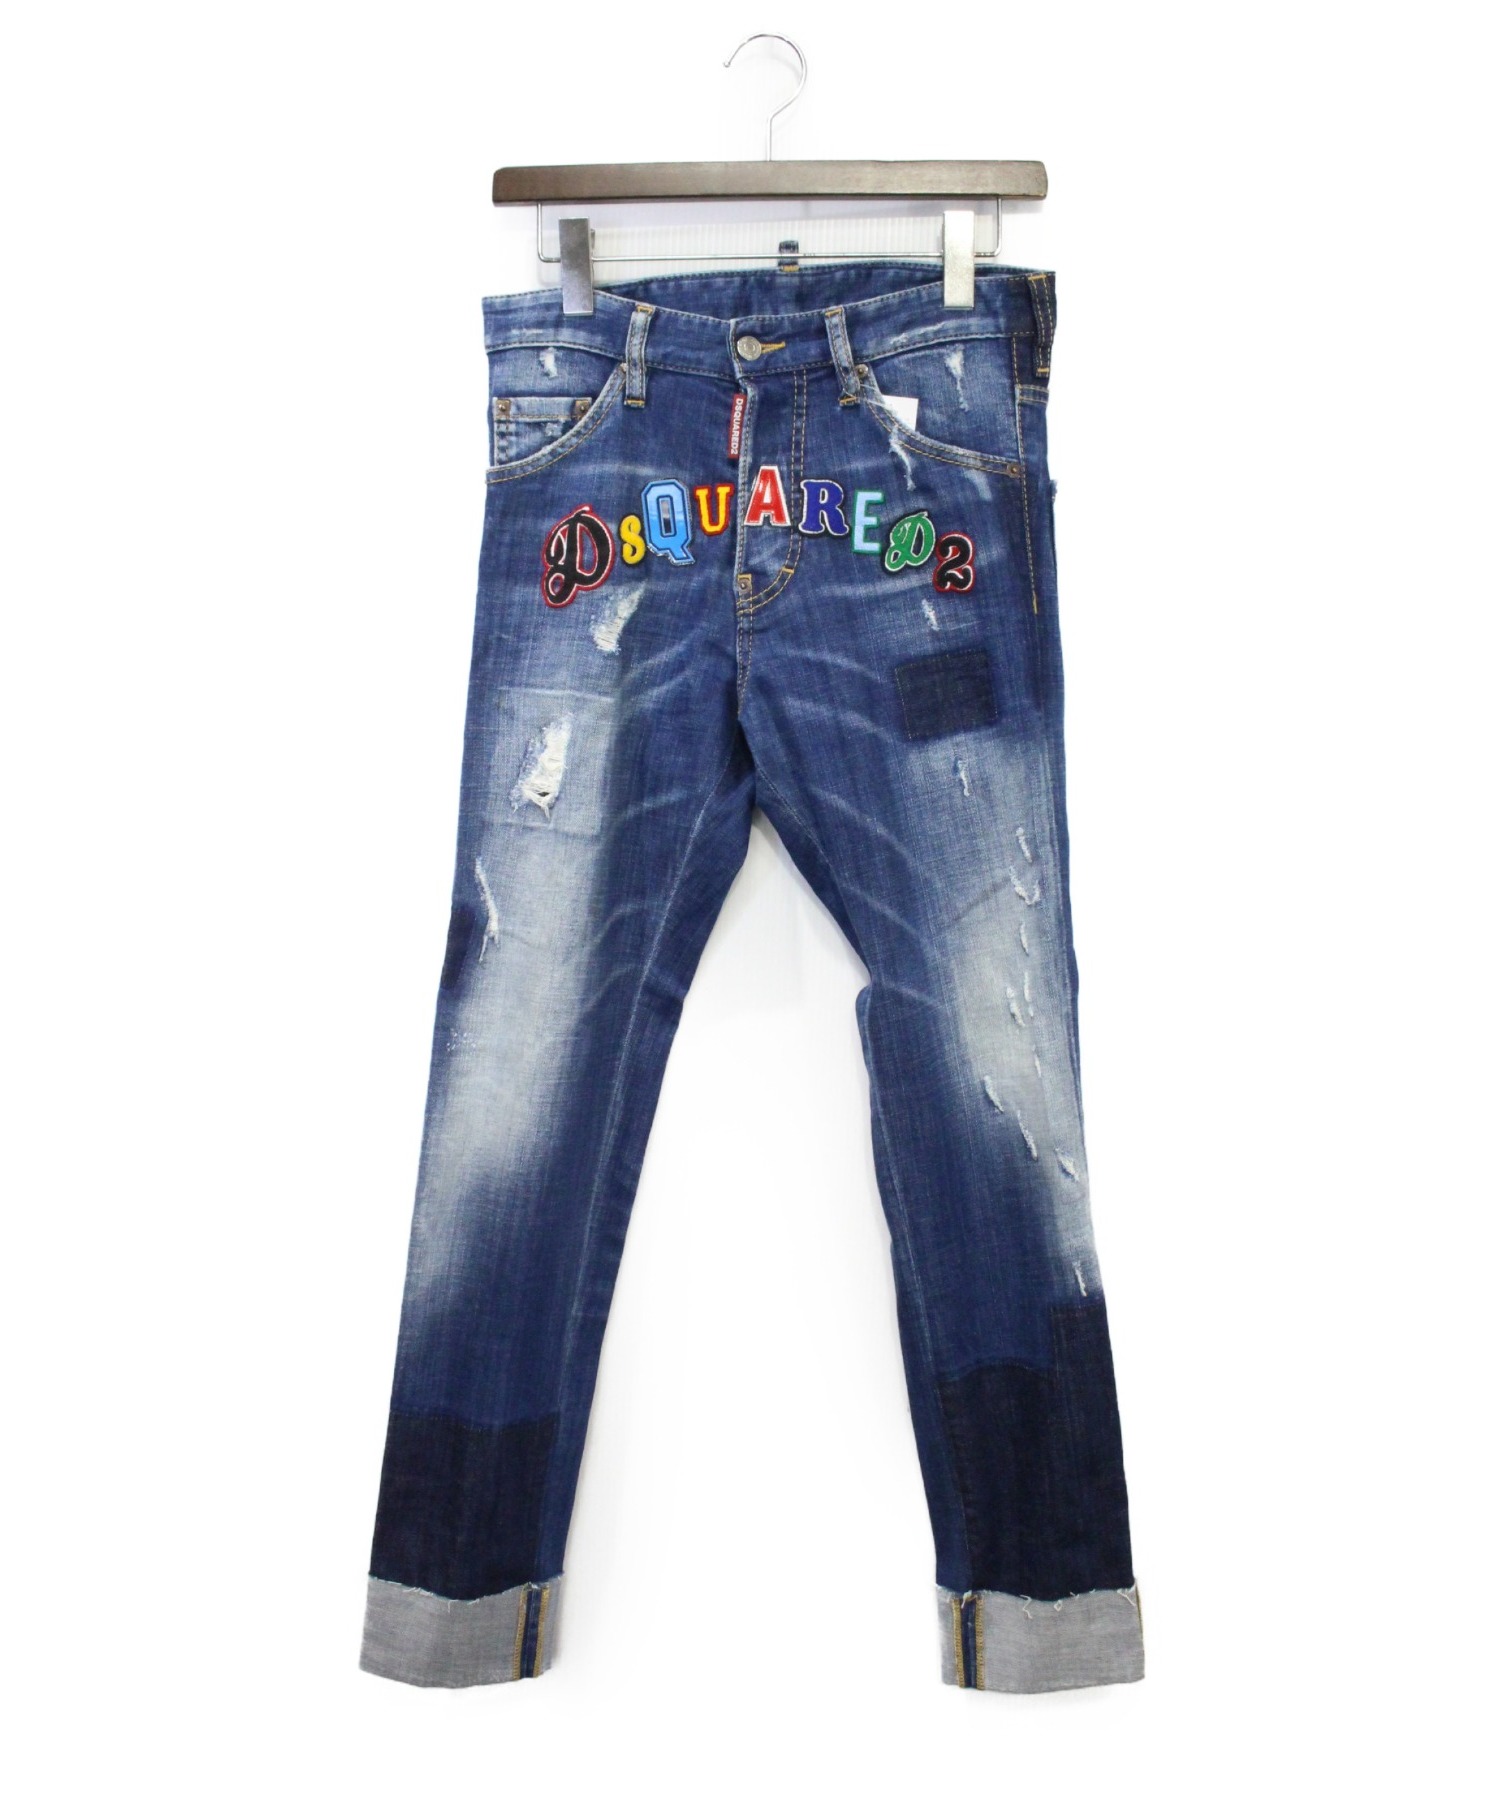 DSQUARED2 (ディースクエアード) 18SS Cool guy jean サイズ:42 Cool guy jean